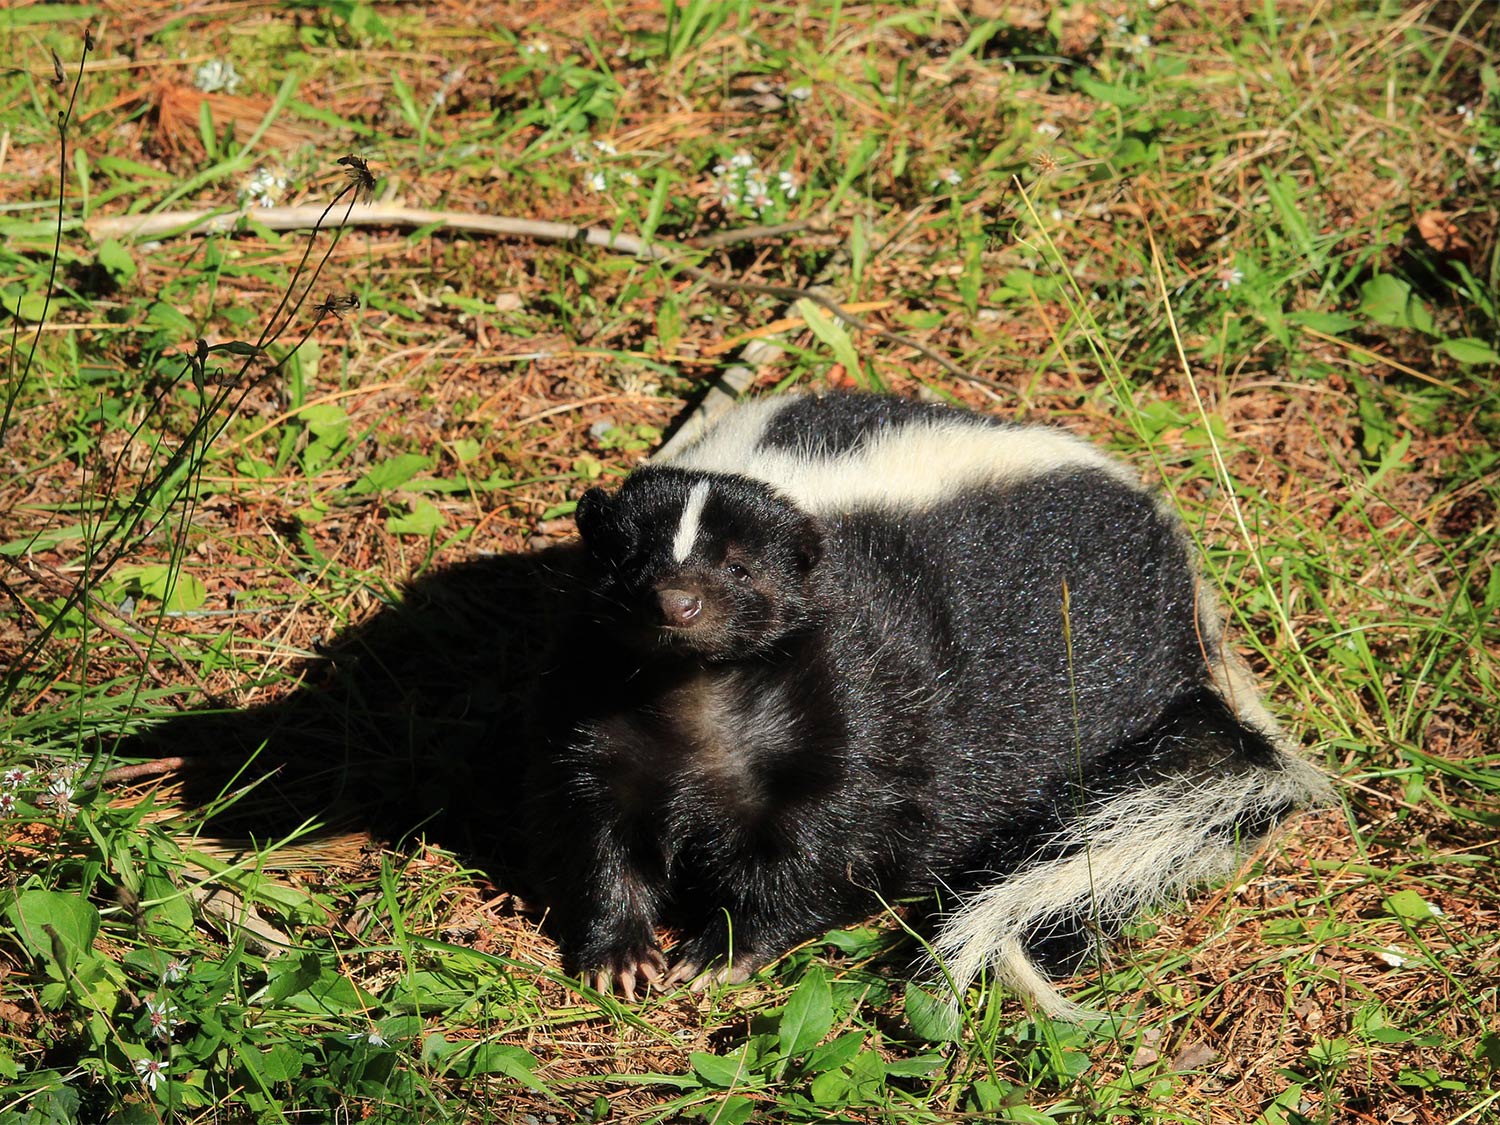 Watch a black bear take on a striped skunk in a surprising faceoff